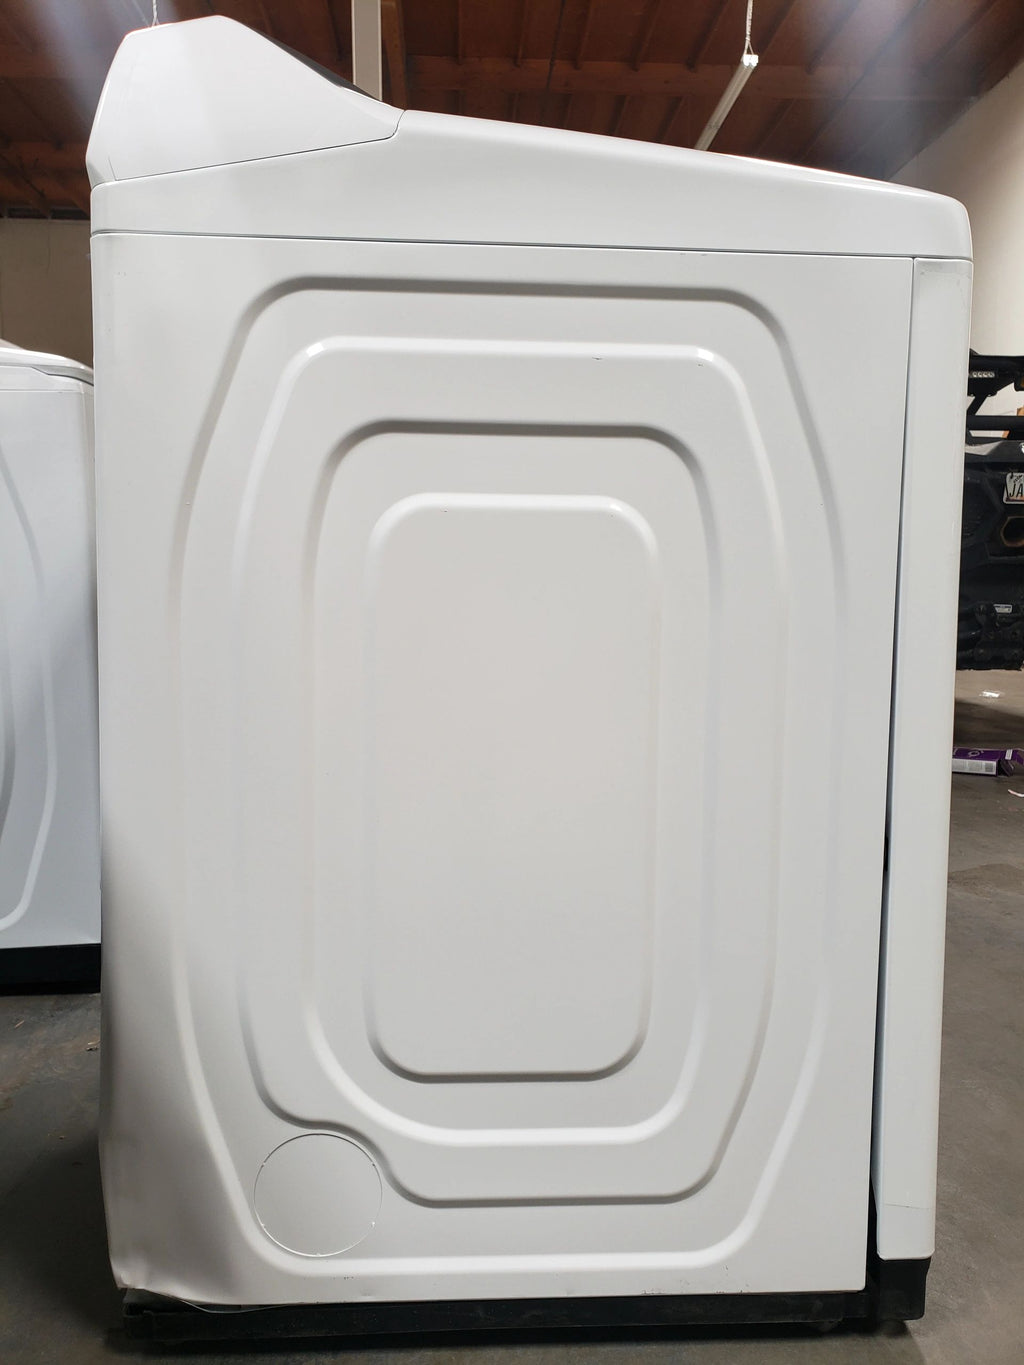 NEW Dent & Scratch. 7.4 cu. ft. White Electric Dryer with Sensor Dry. Model: DVE50R5200W